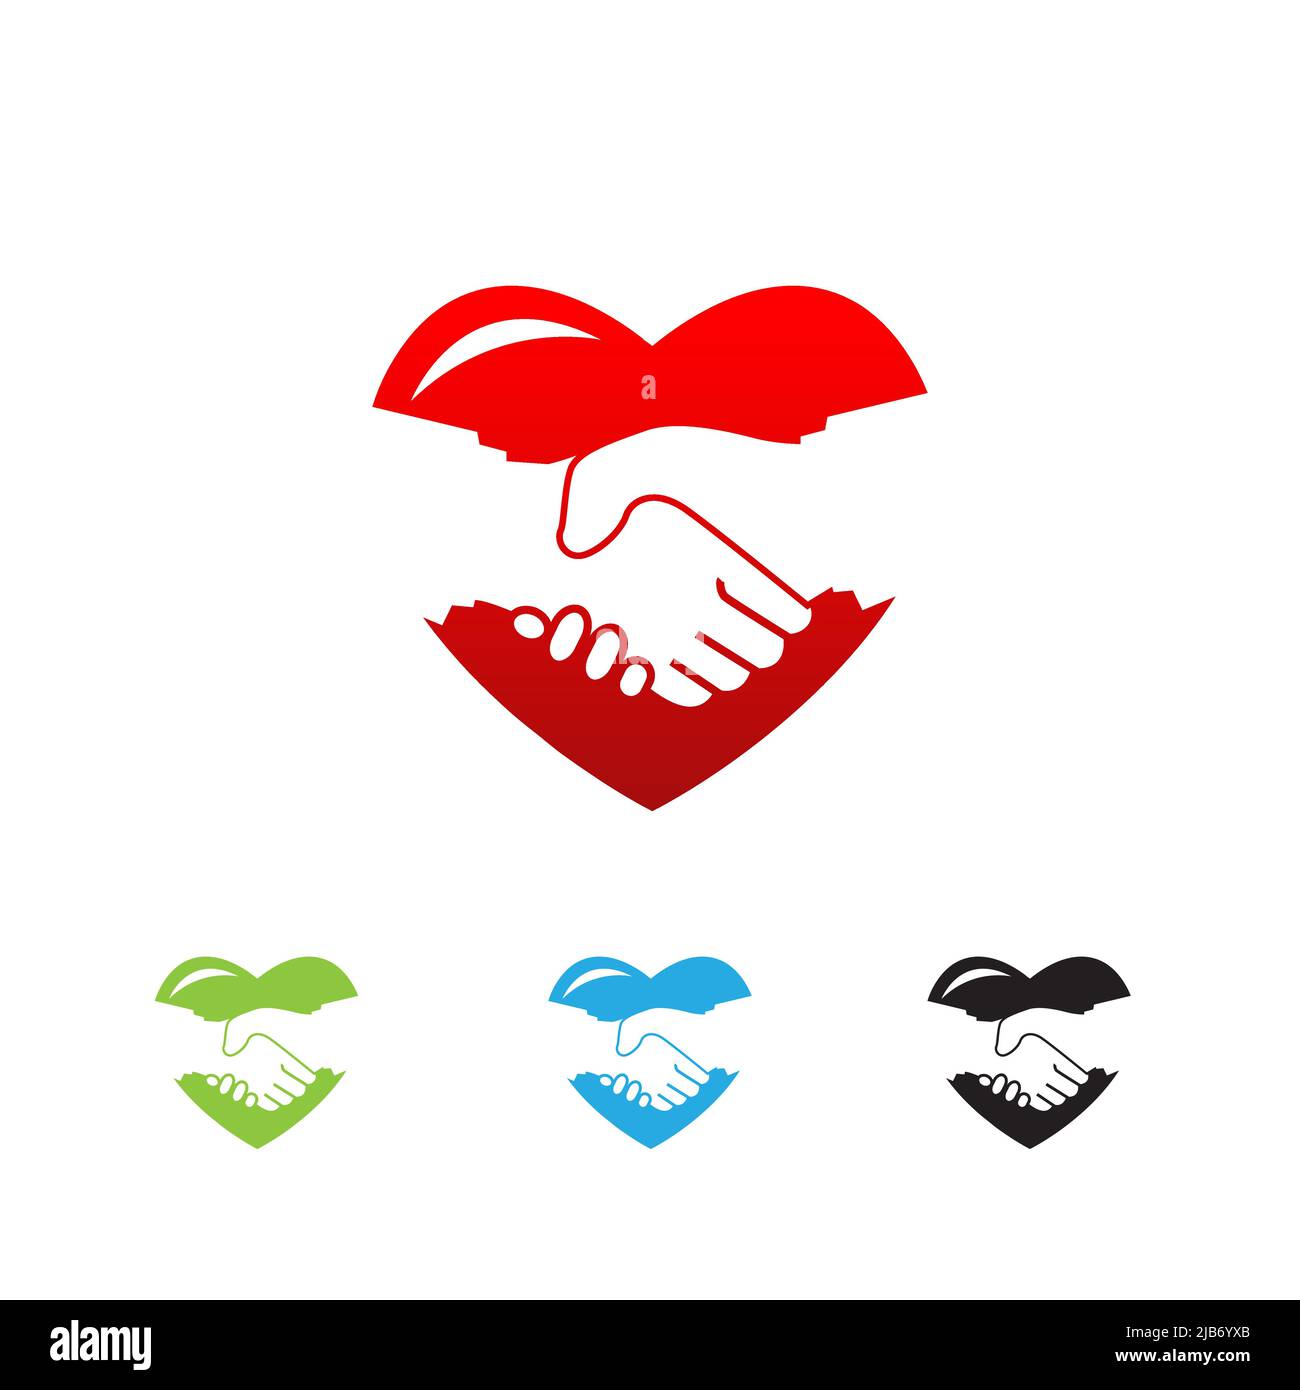 Red hands shaking with heart Logo concept.EPS 10 Stock Vector